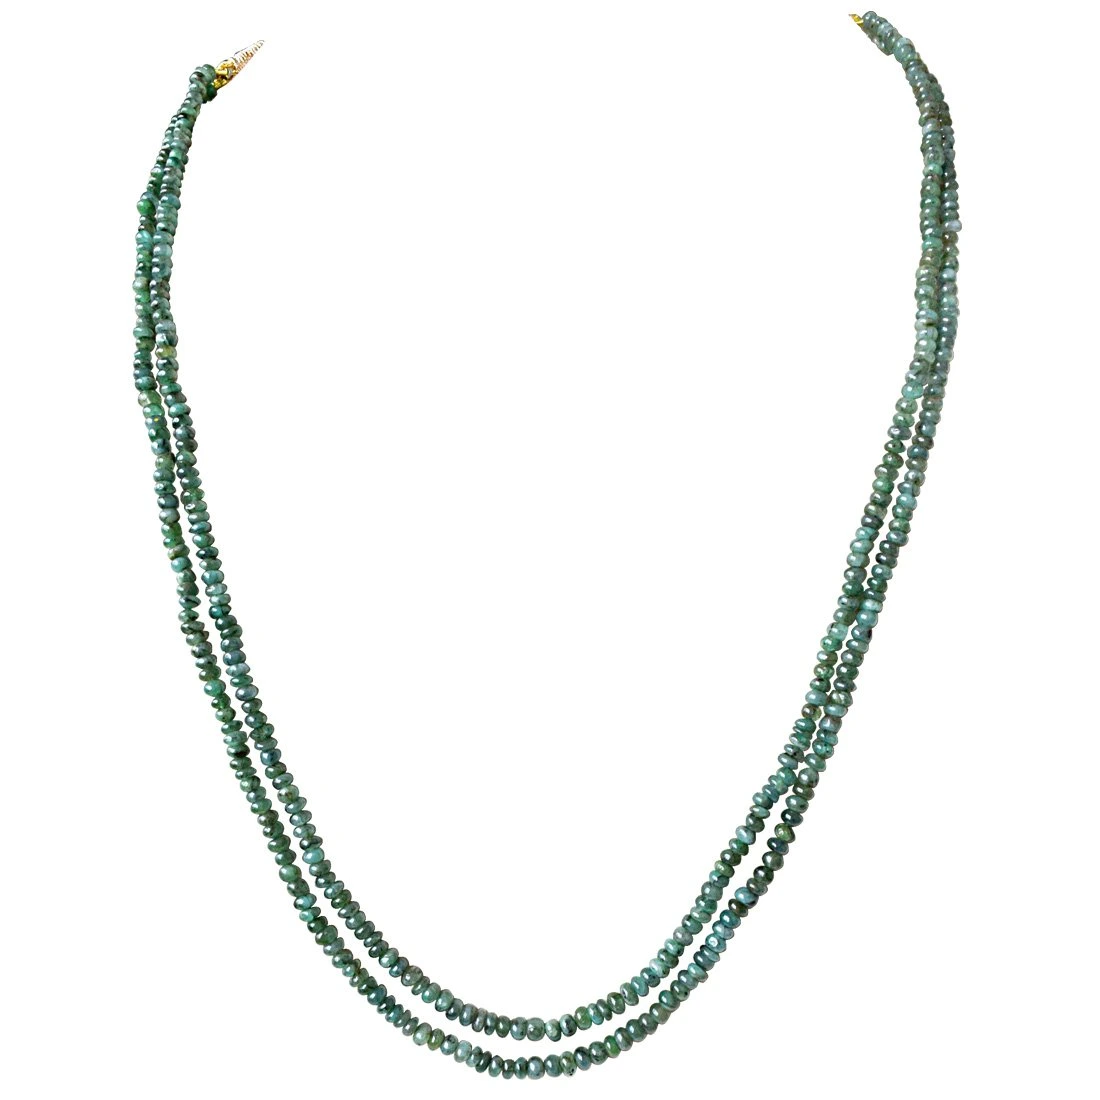 2 Line 110cts Real Natural Green Emerald Beads Necklace for Women (110cts EMR Neck)